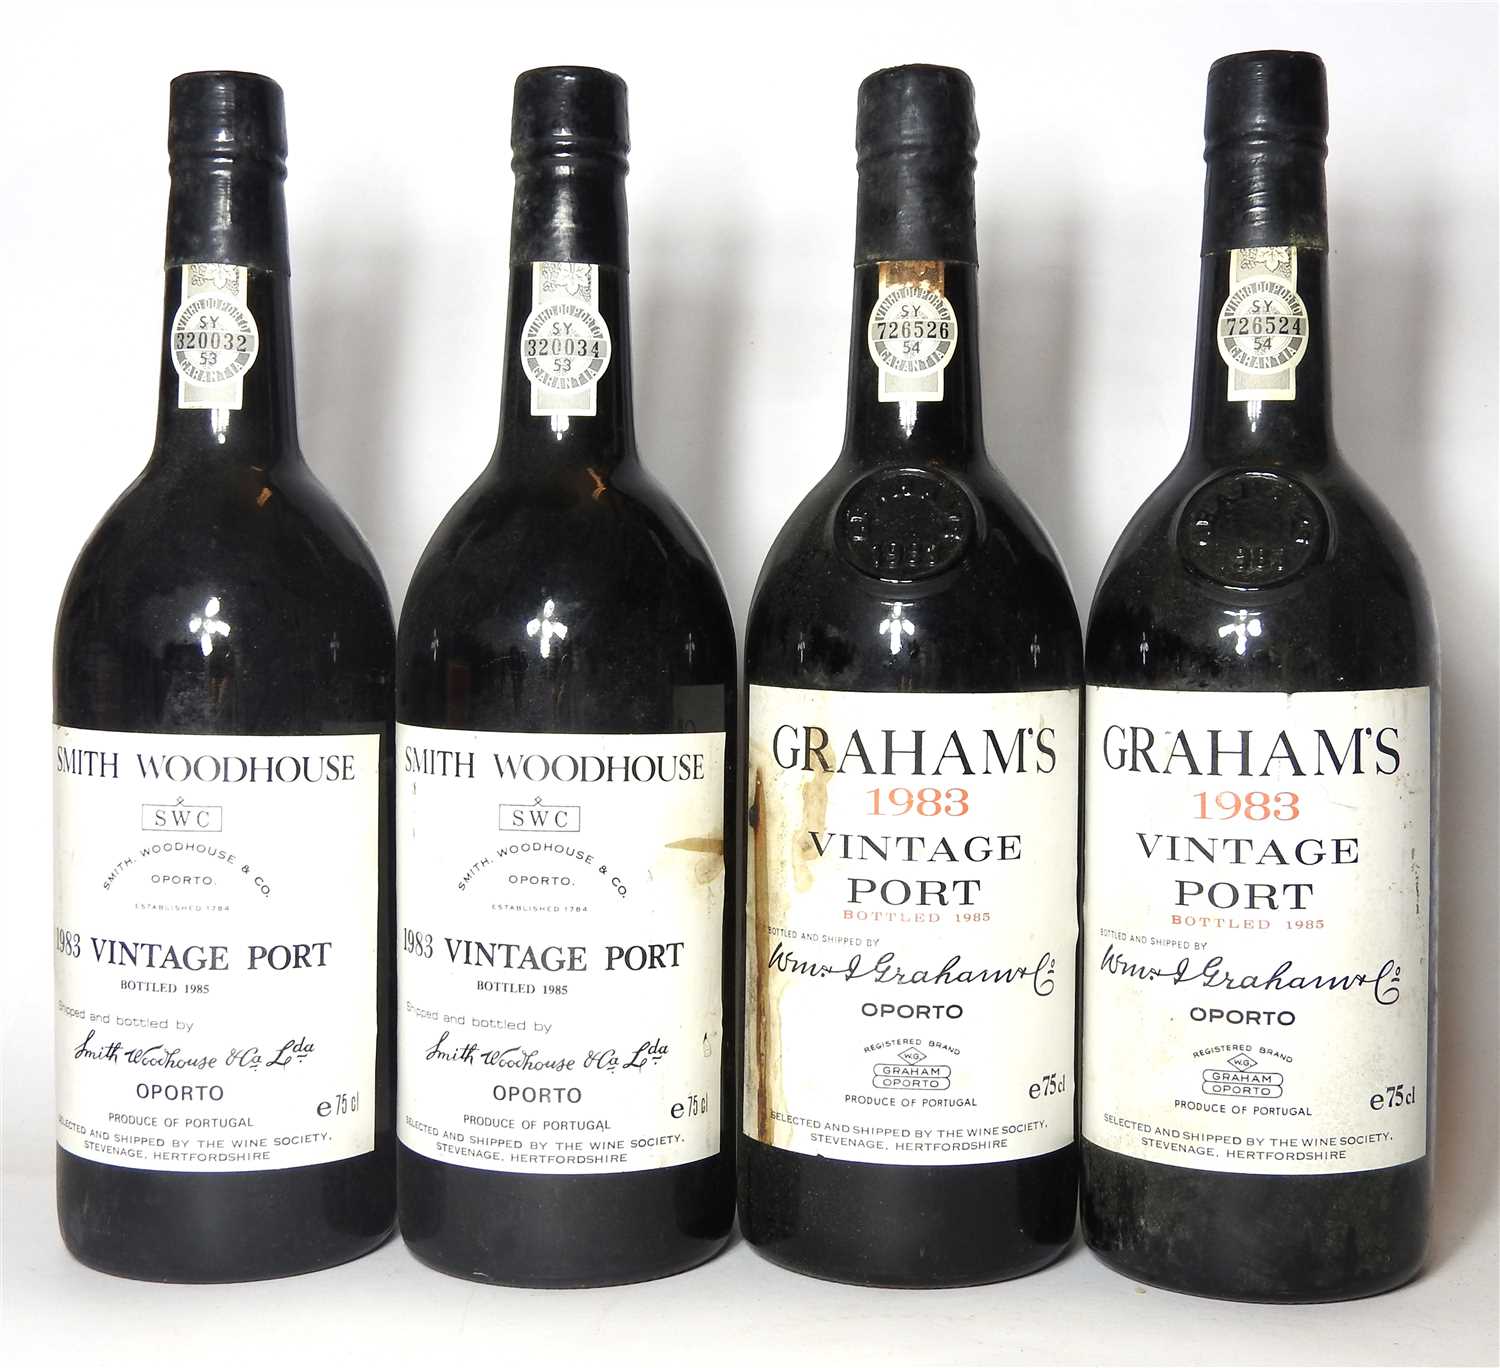 Lot 110 - Graham's,1983, two bottles and Smith Woodhouse, 1983, two bottles, four bottles in total